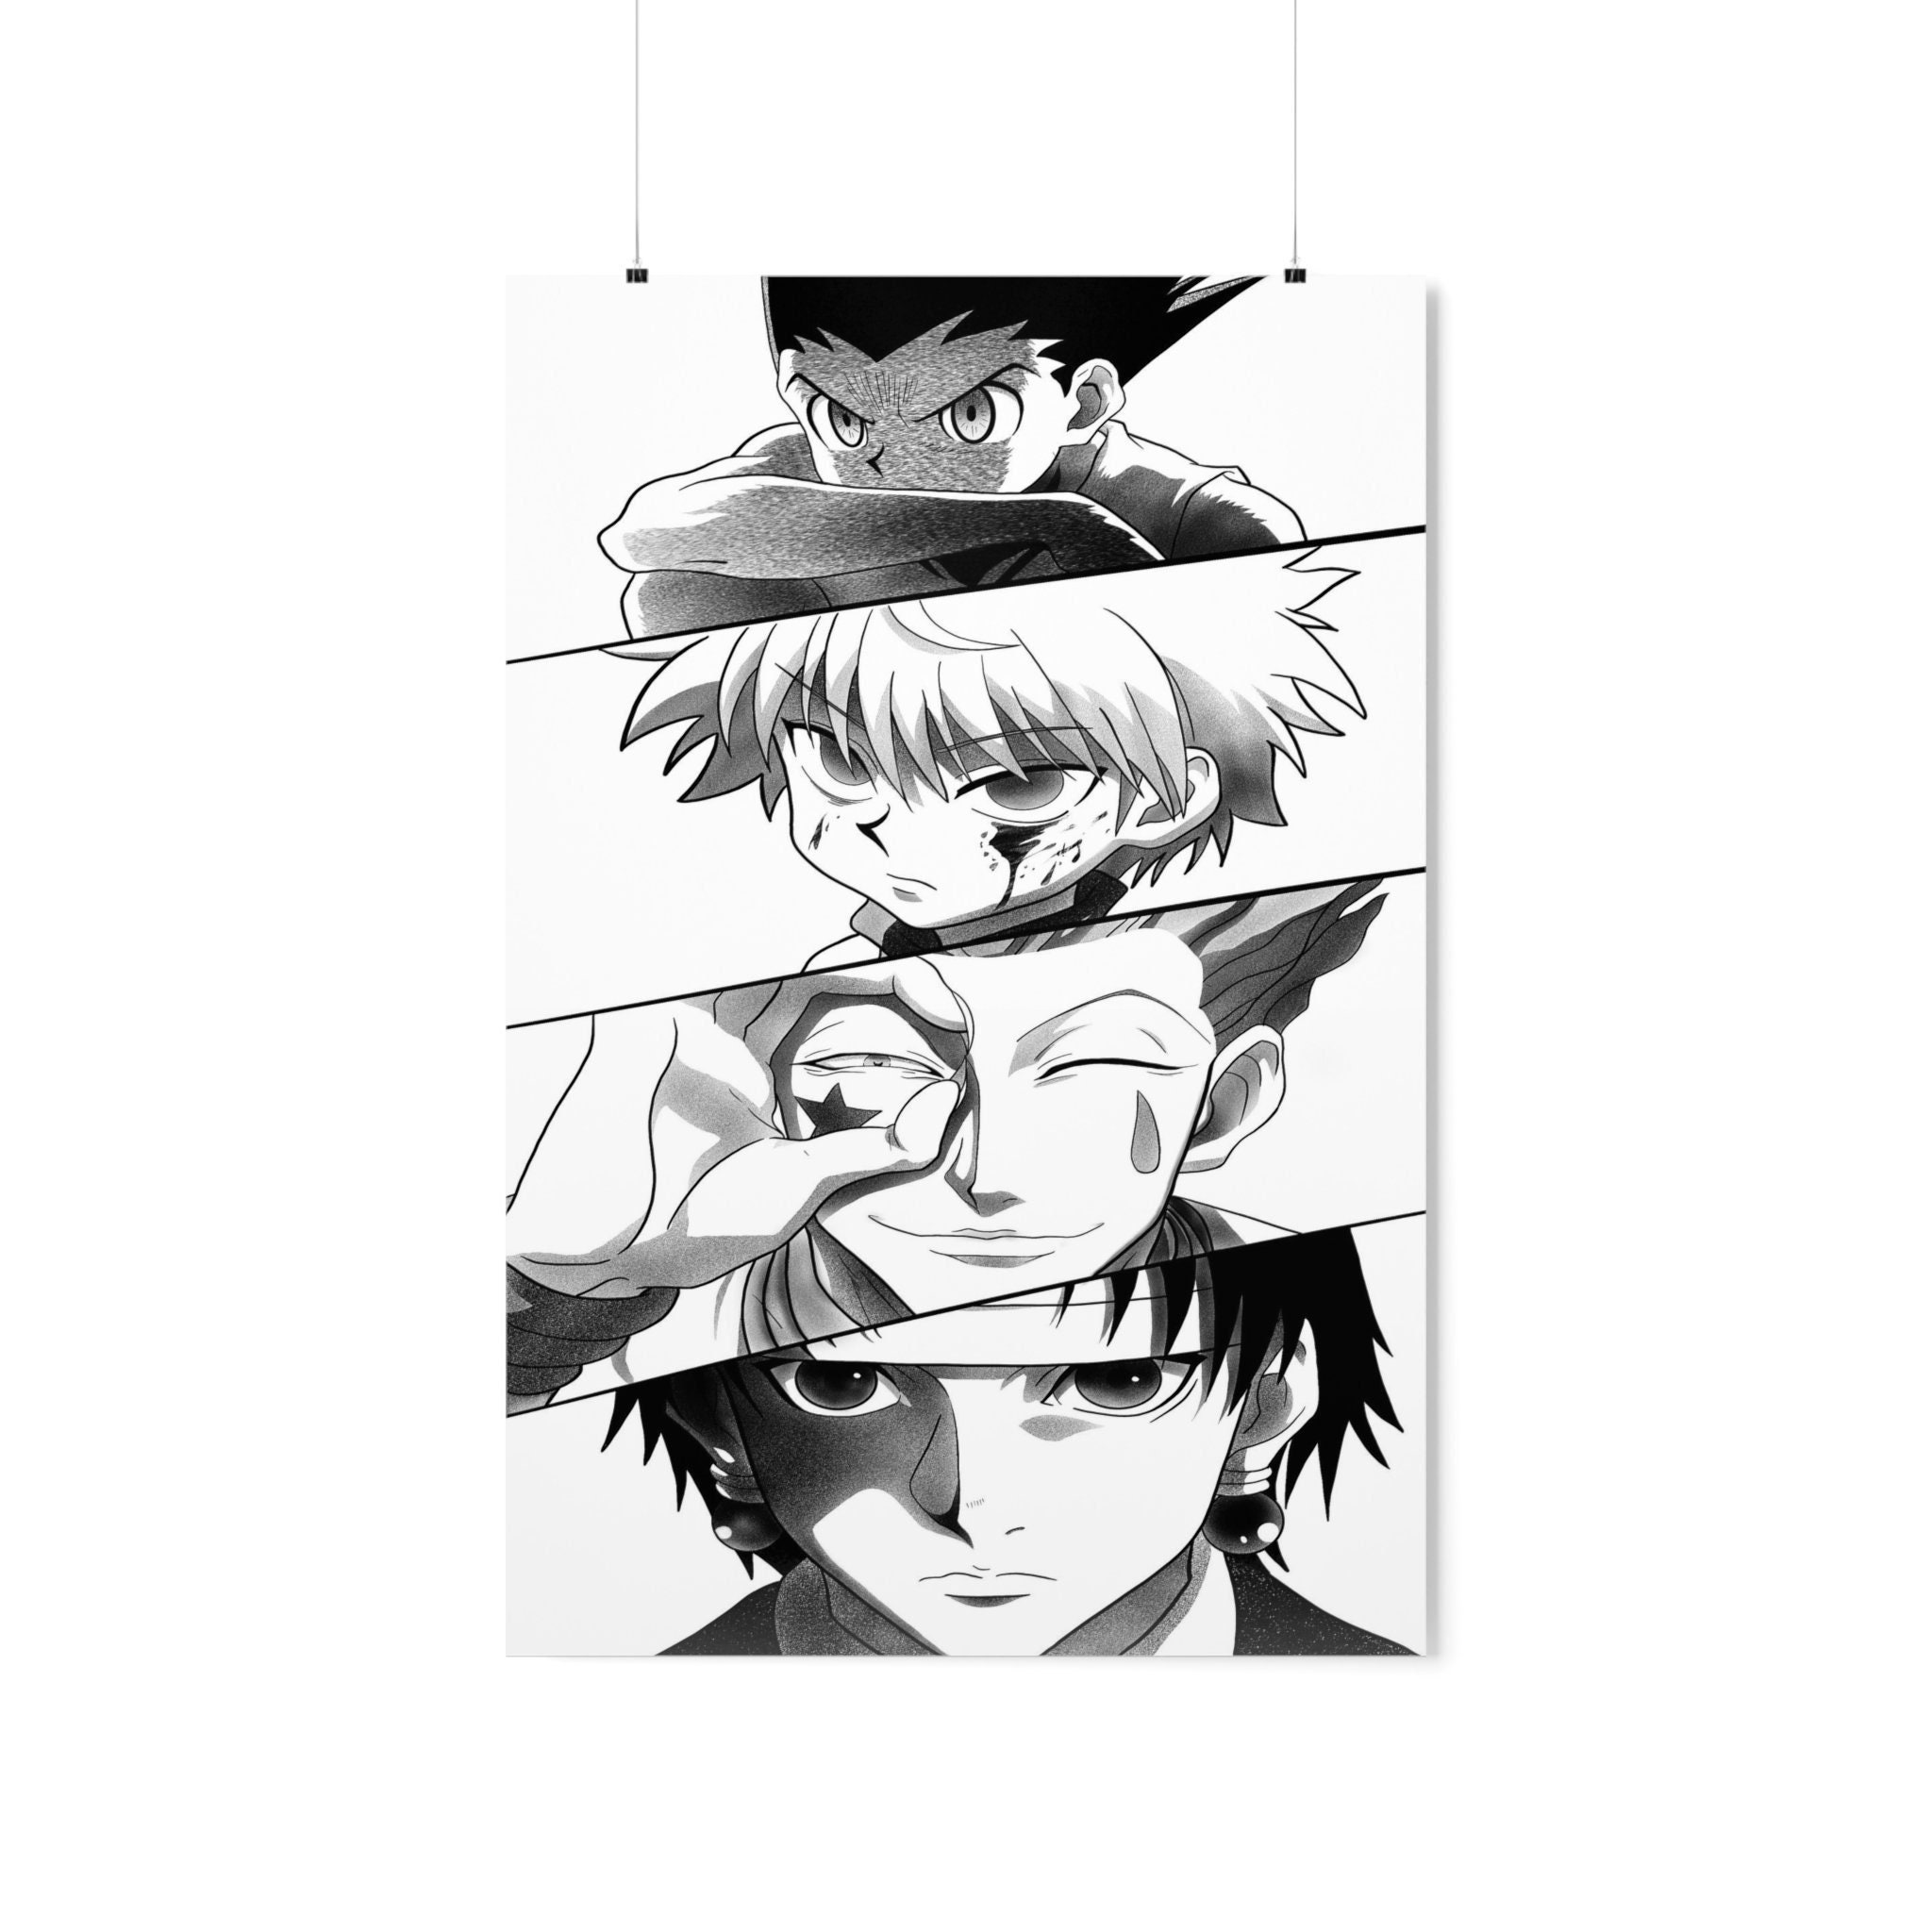 HUNTER X HUNTER - CHARACTER COLLAGE POSTER - 24x36 - 54283